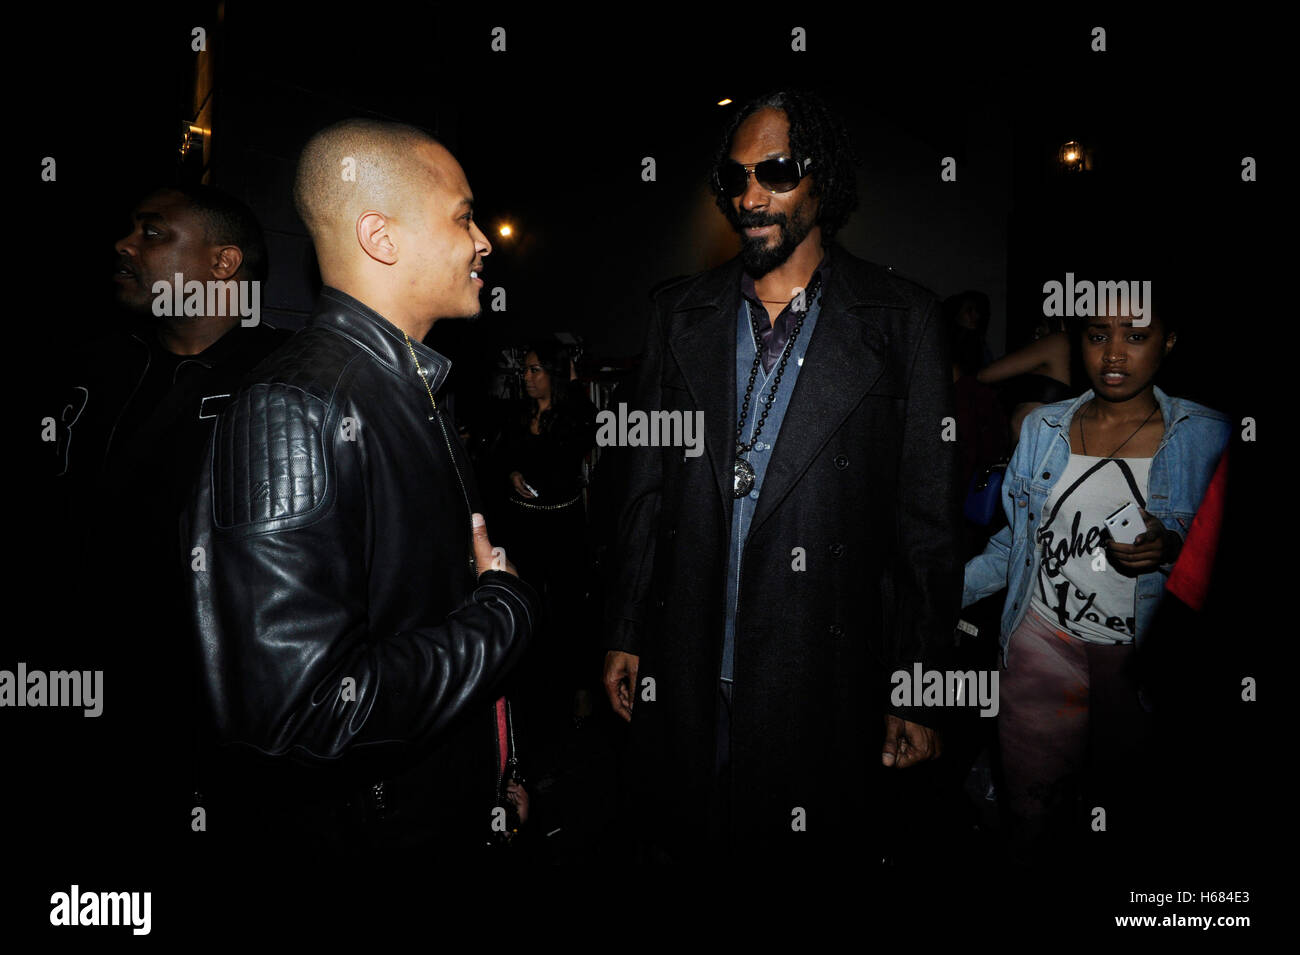 (L-R) Rappers T.I. and Snoop Dogg attends Young Jeezy and 2 Chainz 'RIP' Music Video at Greystone Manor on February 11, 2013 in Los Angeles, California. Stock Photo